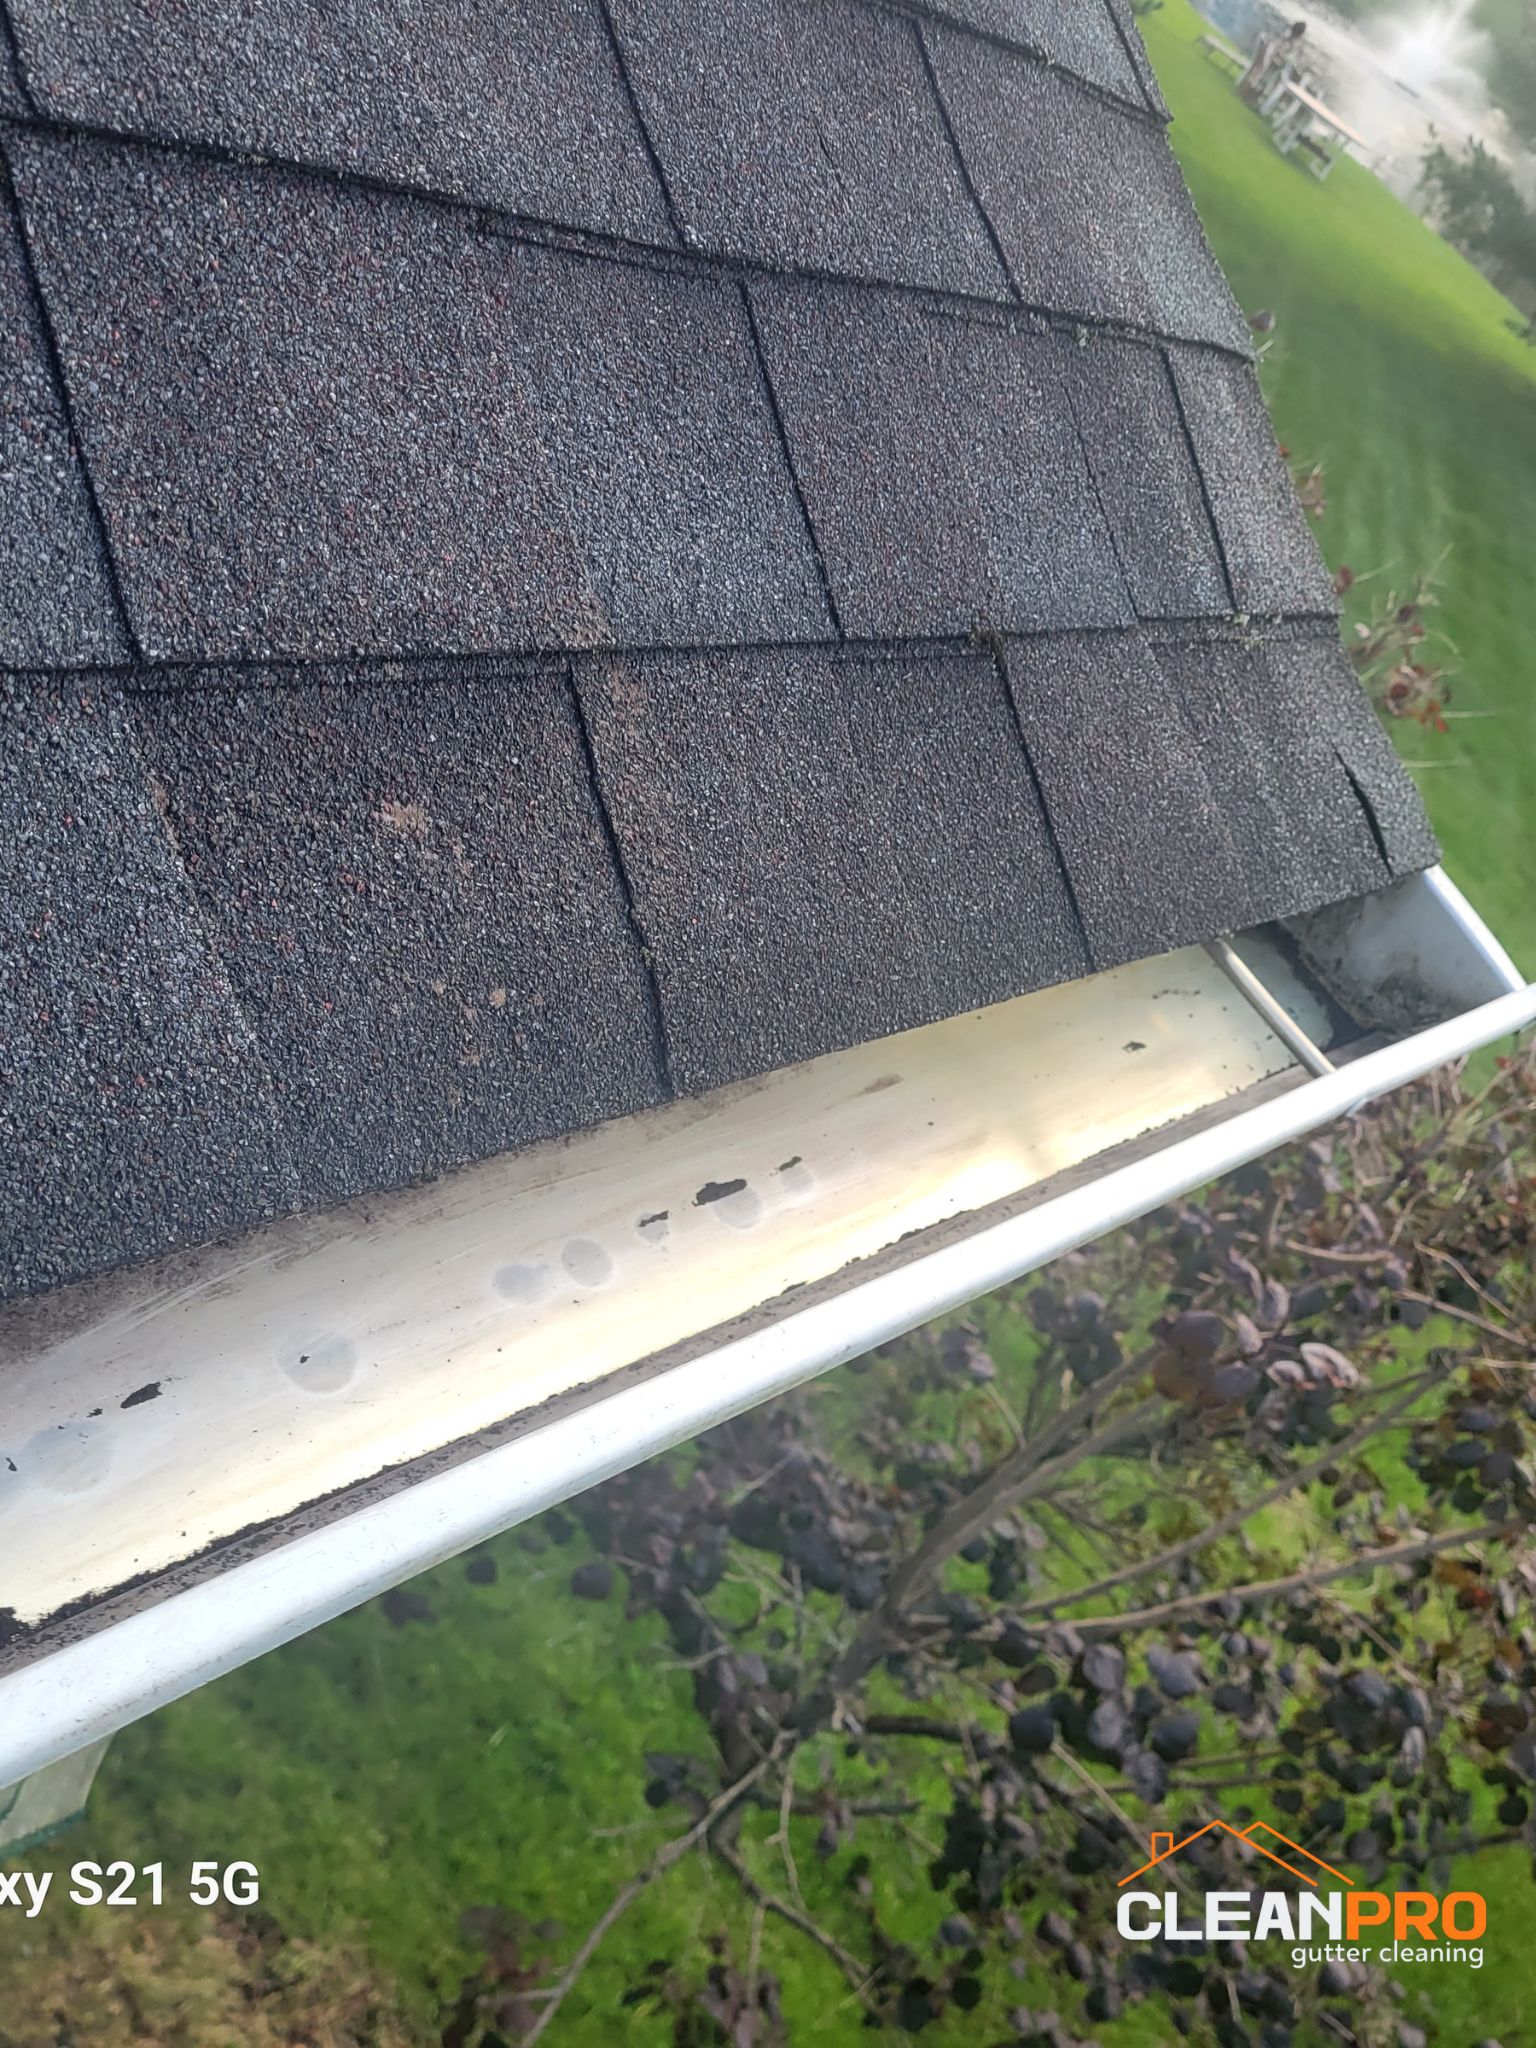 Quality Gutter Cleaning in Ann Arbor MI